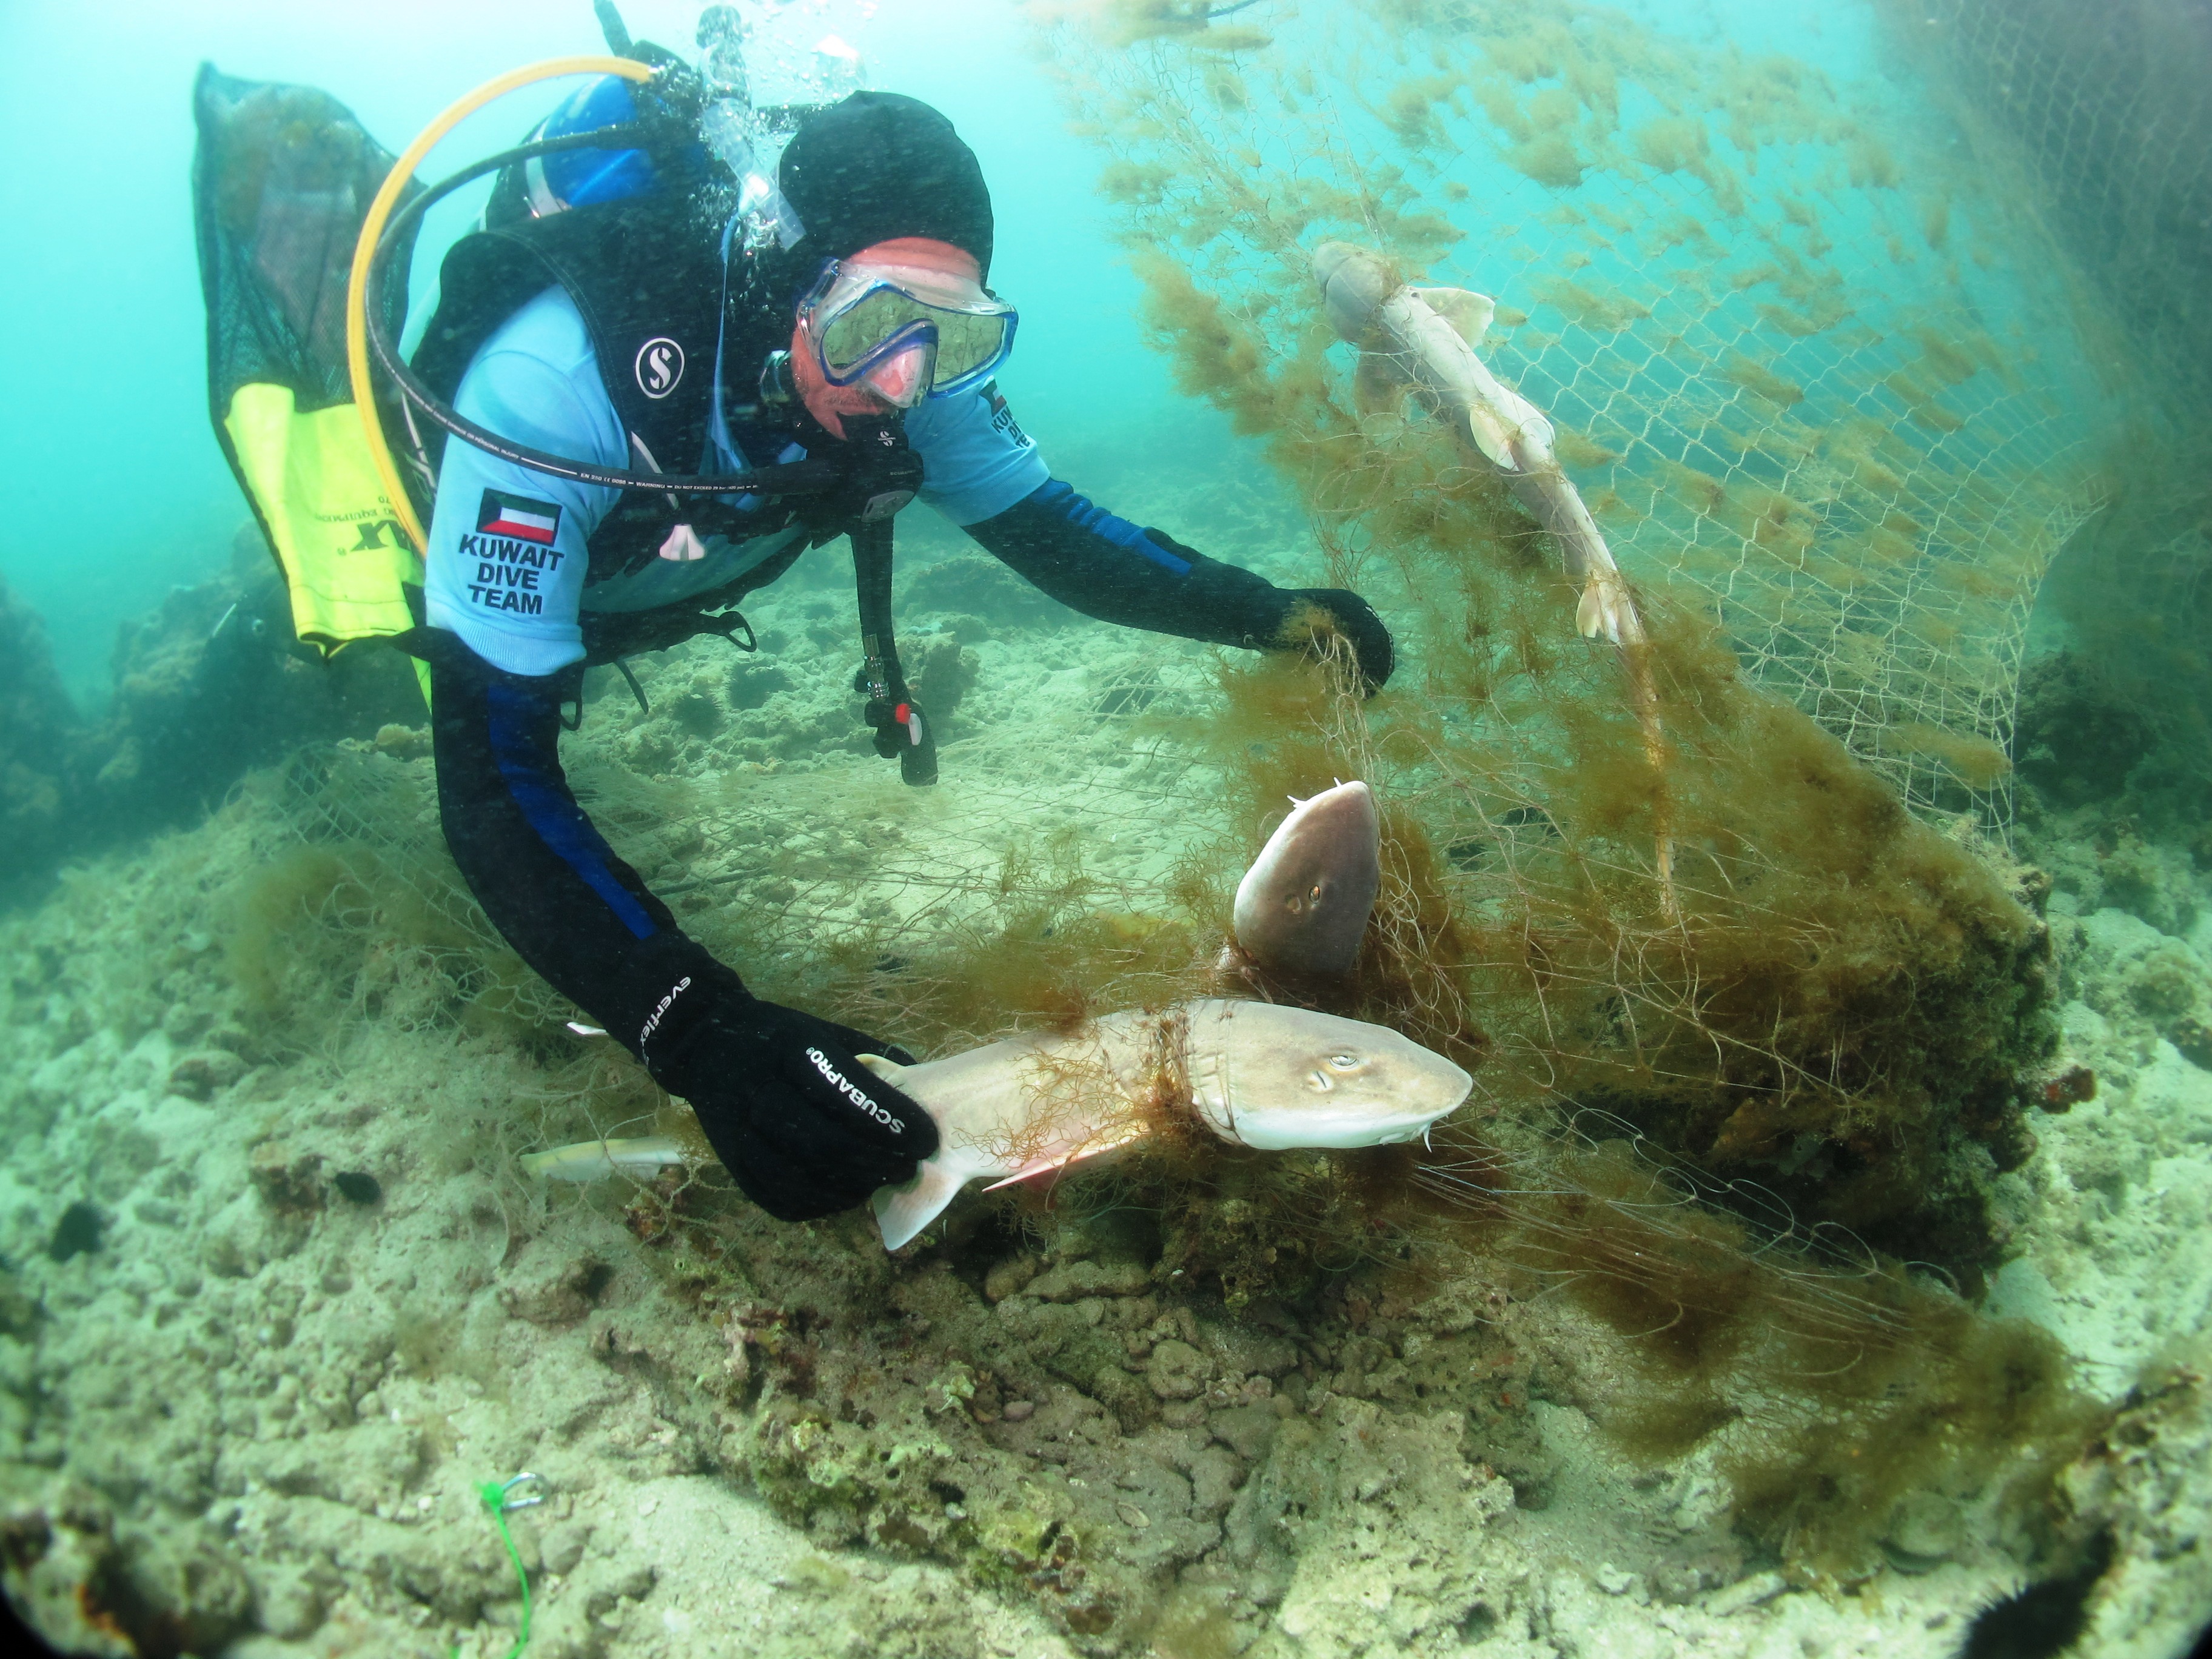 Kuwait divers save baby sharks south of Kuwait